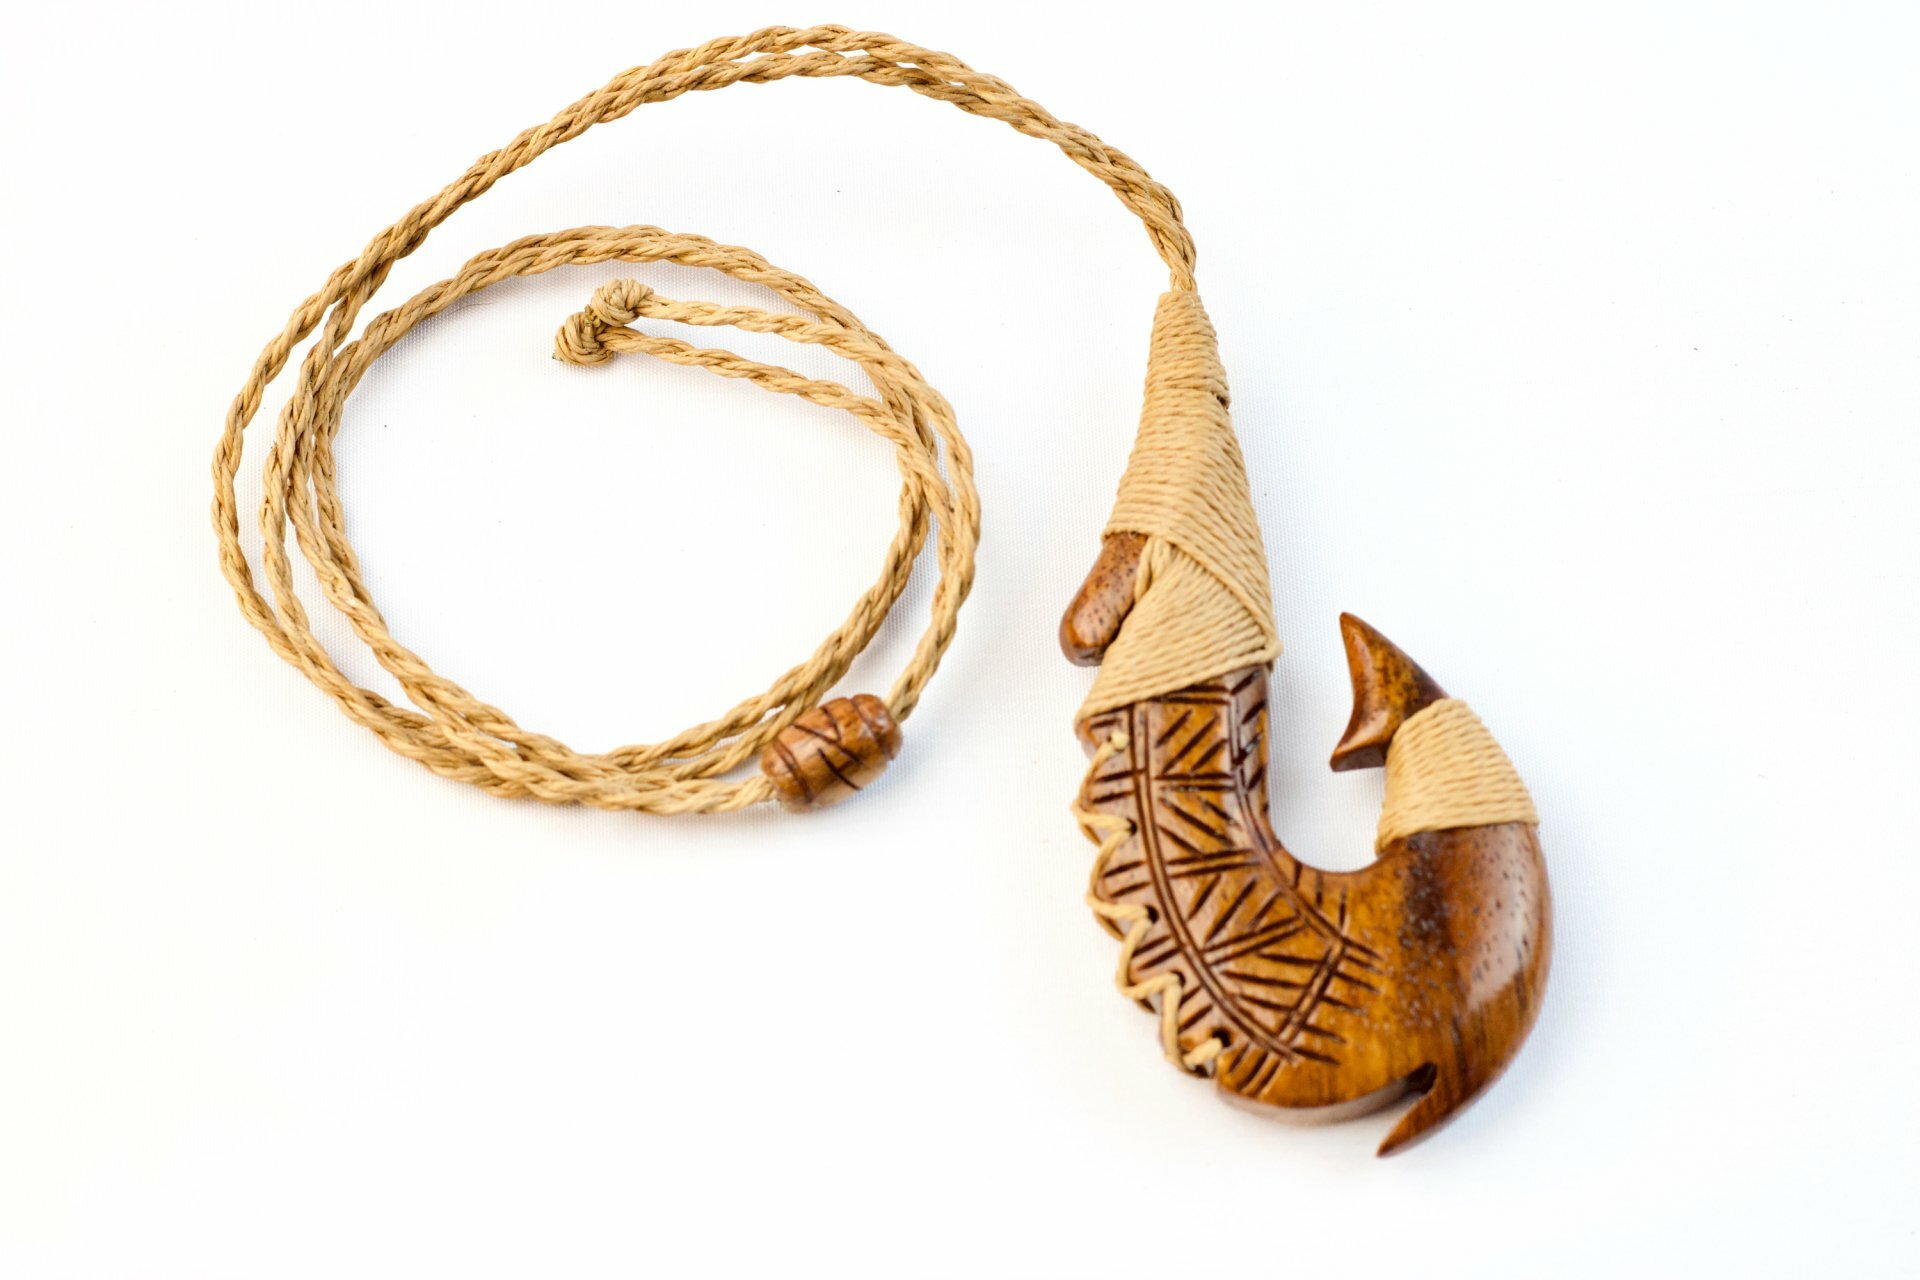 Koa Tribal Carved and Lashed Fish Hook Pendant on Adjustable Hand Braided  Tan Cord